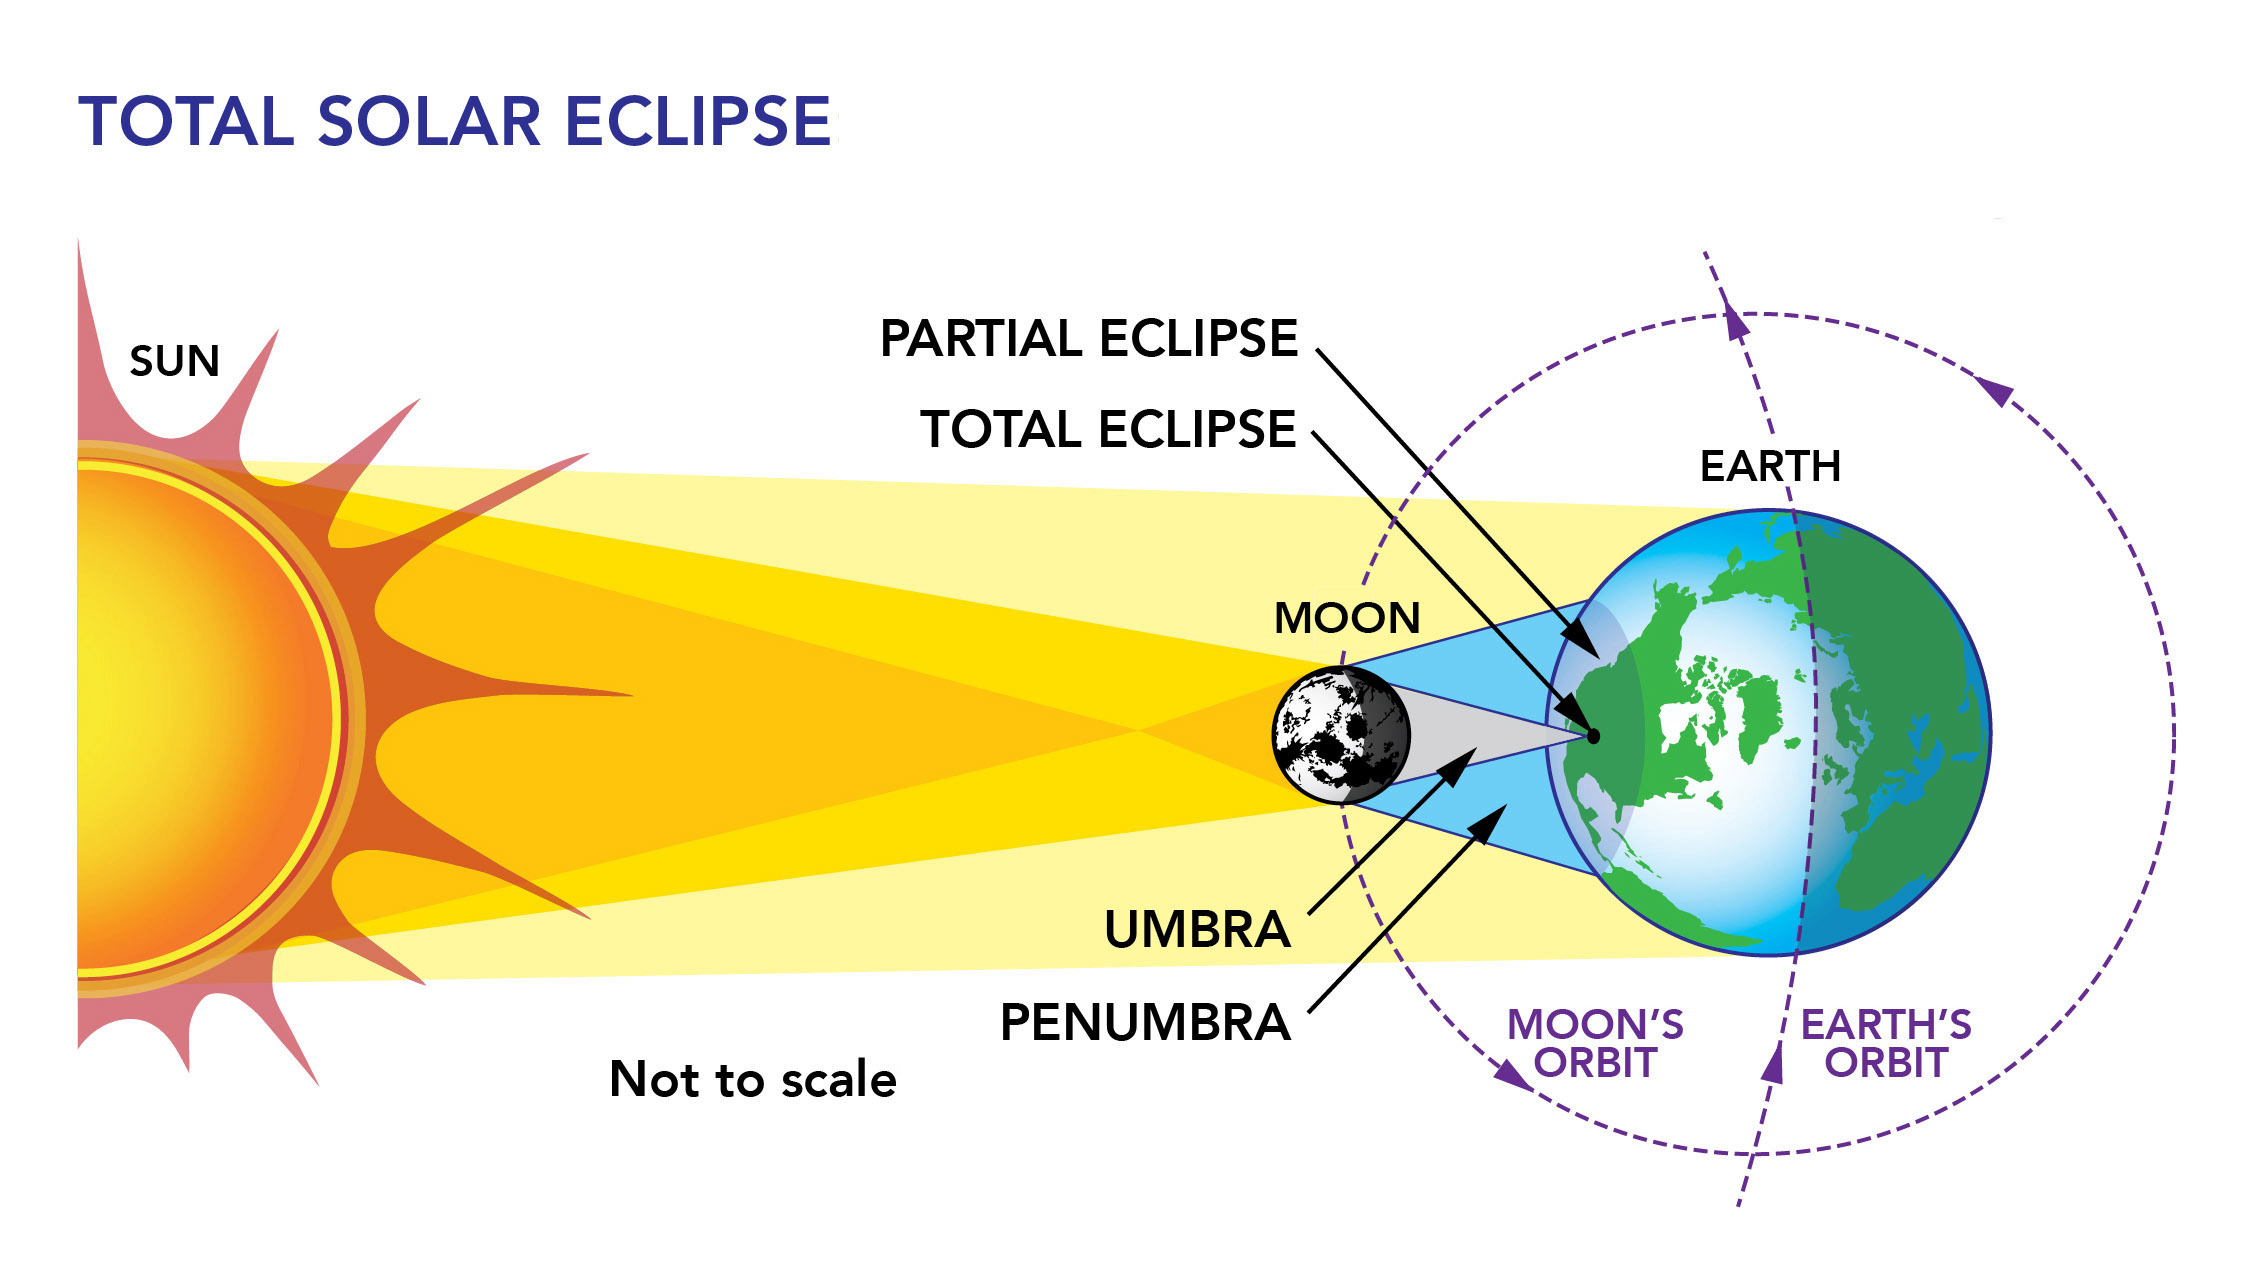 A diagram shows the Sun on the left, Earth on the right, and the Moon in between. The Moon blocks some sunlight from reaching Earth, casting a smaller shadow cone, labeled the umbra, and a larger shadow cone, labeled the penumbra. One arrow labeled "total eclipse" points to the small area on Earth touched by the umbra. A second arrow labeled "partial eclipse" points to the larger area on Earth touched by the penumbra. A dashed circle around Earth is labeled "Moon's orbit" and a dashed arc passing through Earth is labeled "Earth's orbit." At the top are the words "total solar eclipse" and at the bottom are the words "not to scale."